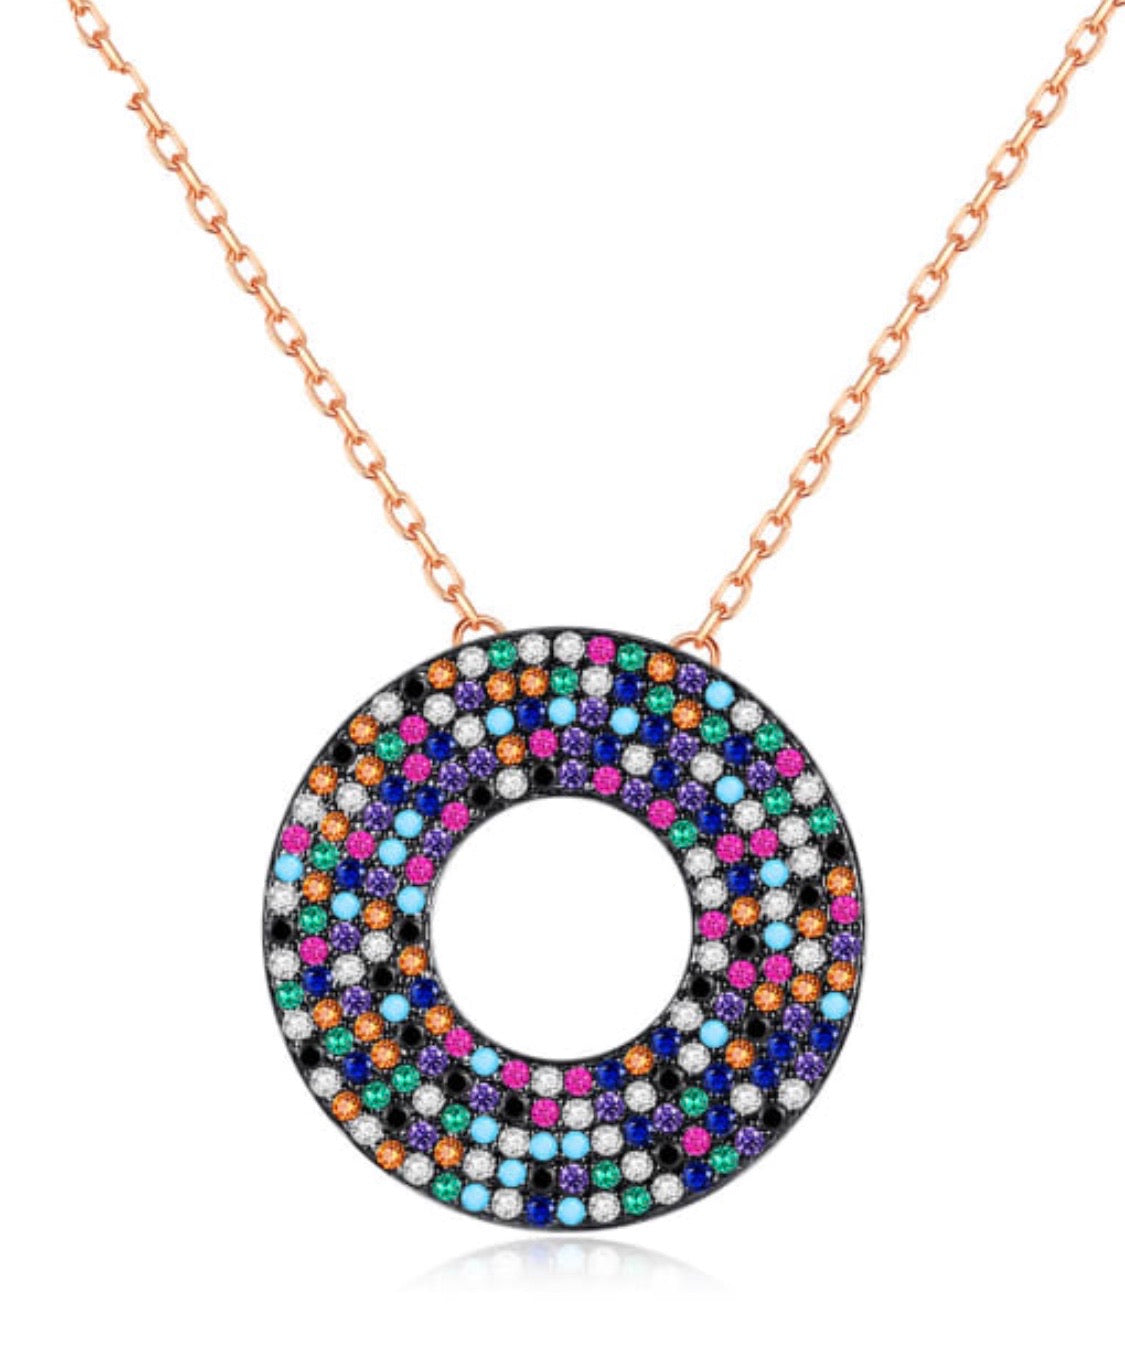 Colorful Stone Lia Necklace - Bohemian Style Pendant with Black Finish and 14k Rose Gold Plating, Cubic Zirconia Stone, 16-18" Length Bijou Her